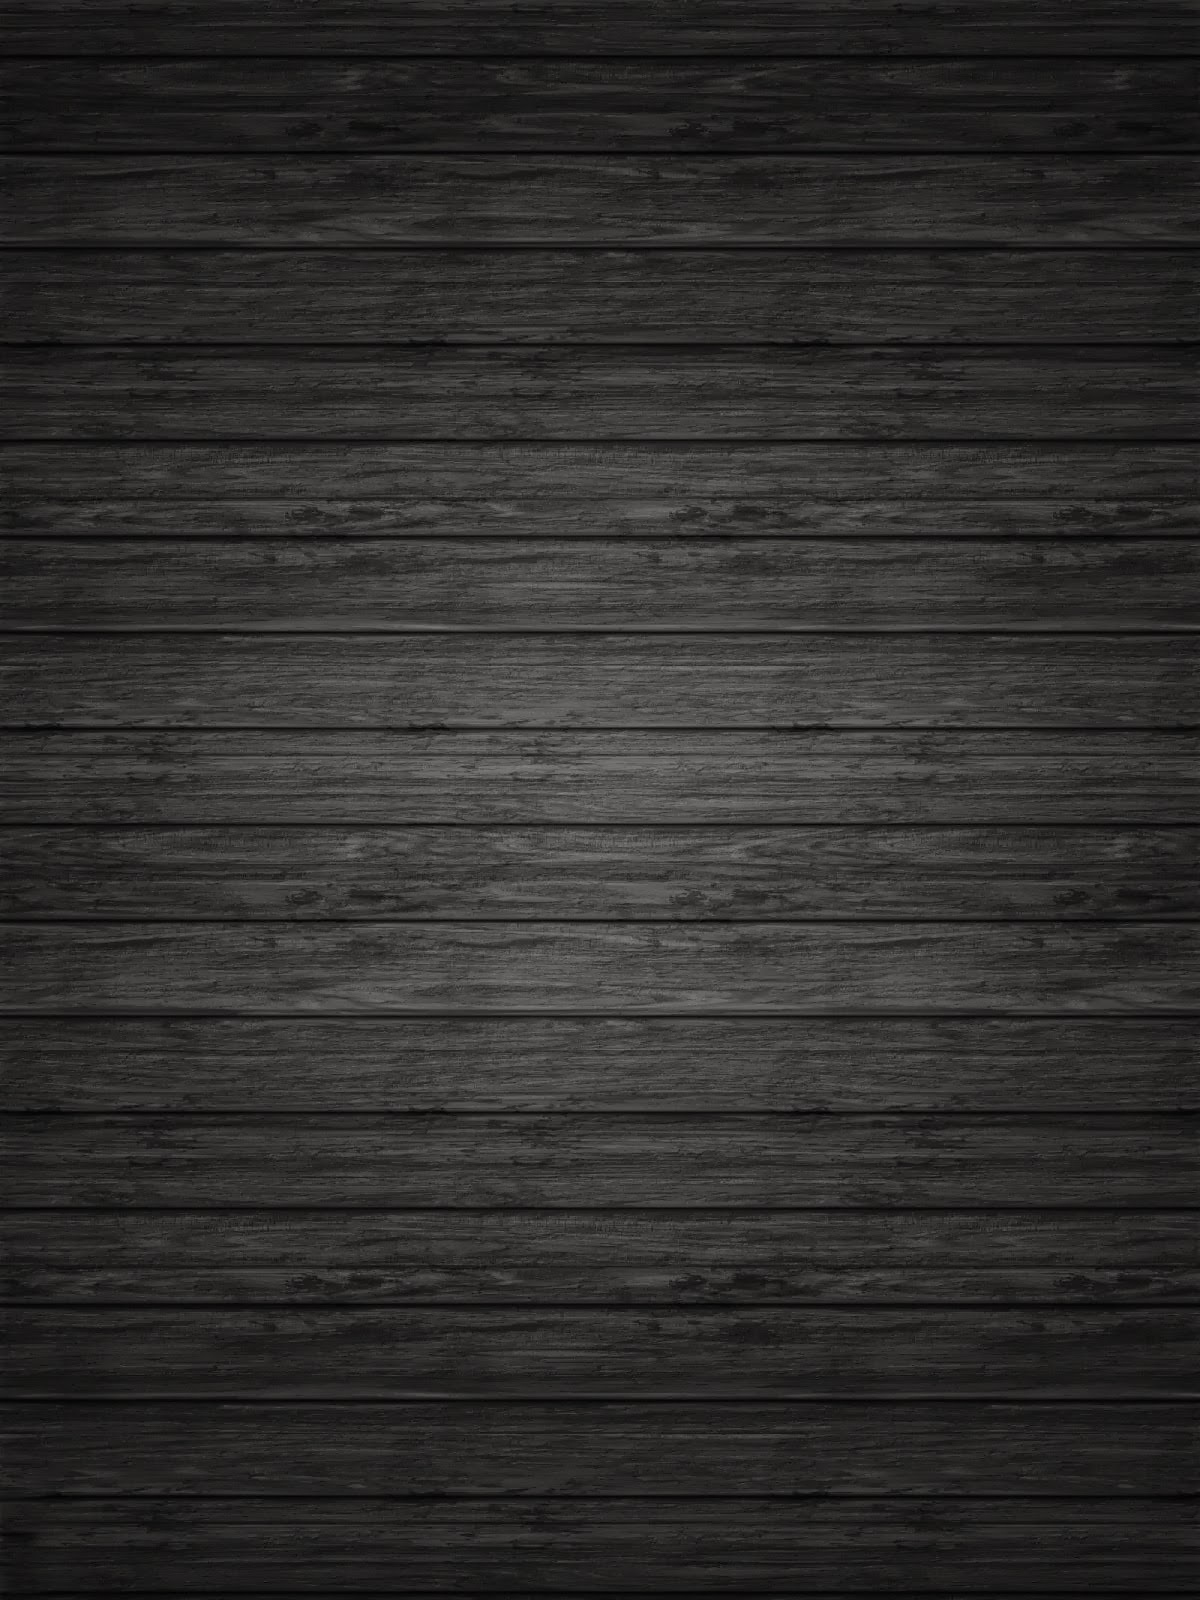 Image - Black-wood-backgrounds-download-abstract-images-wood-background ...